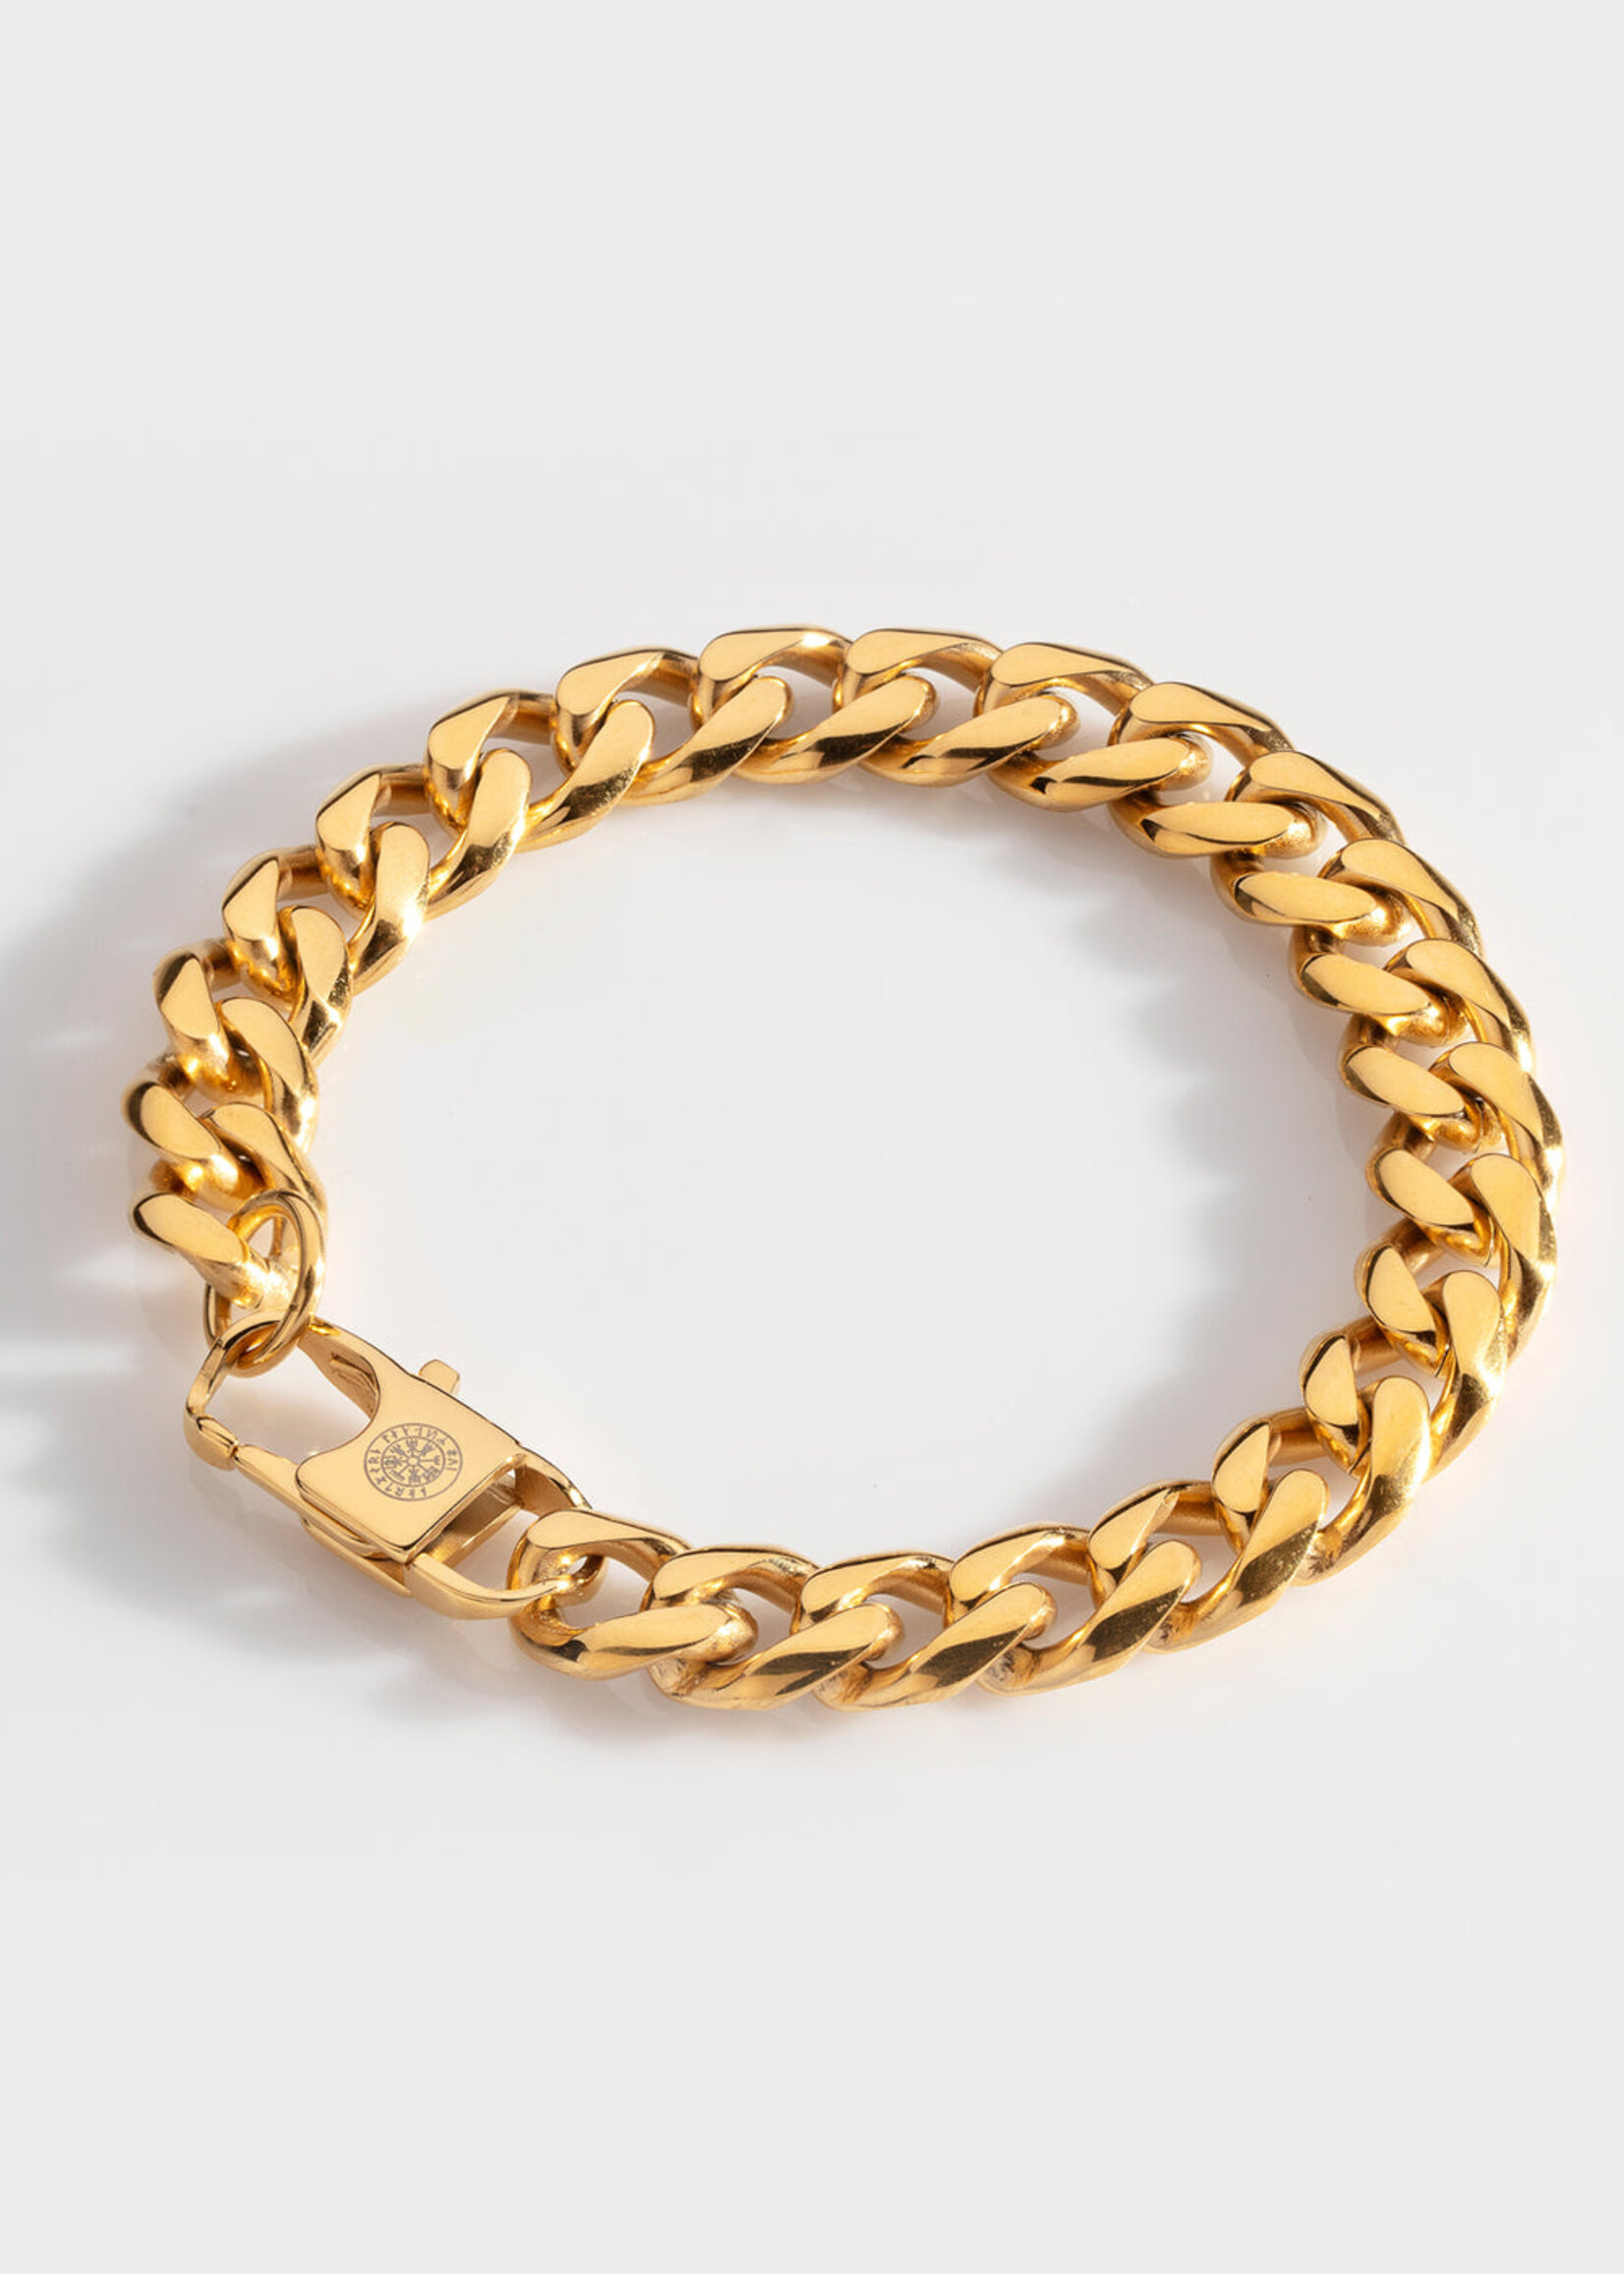 Northern Legacy NL Sequence Bracelet - Gold Tone